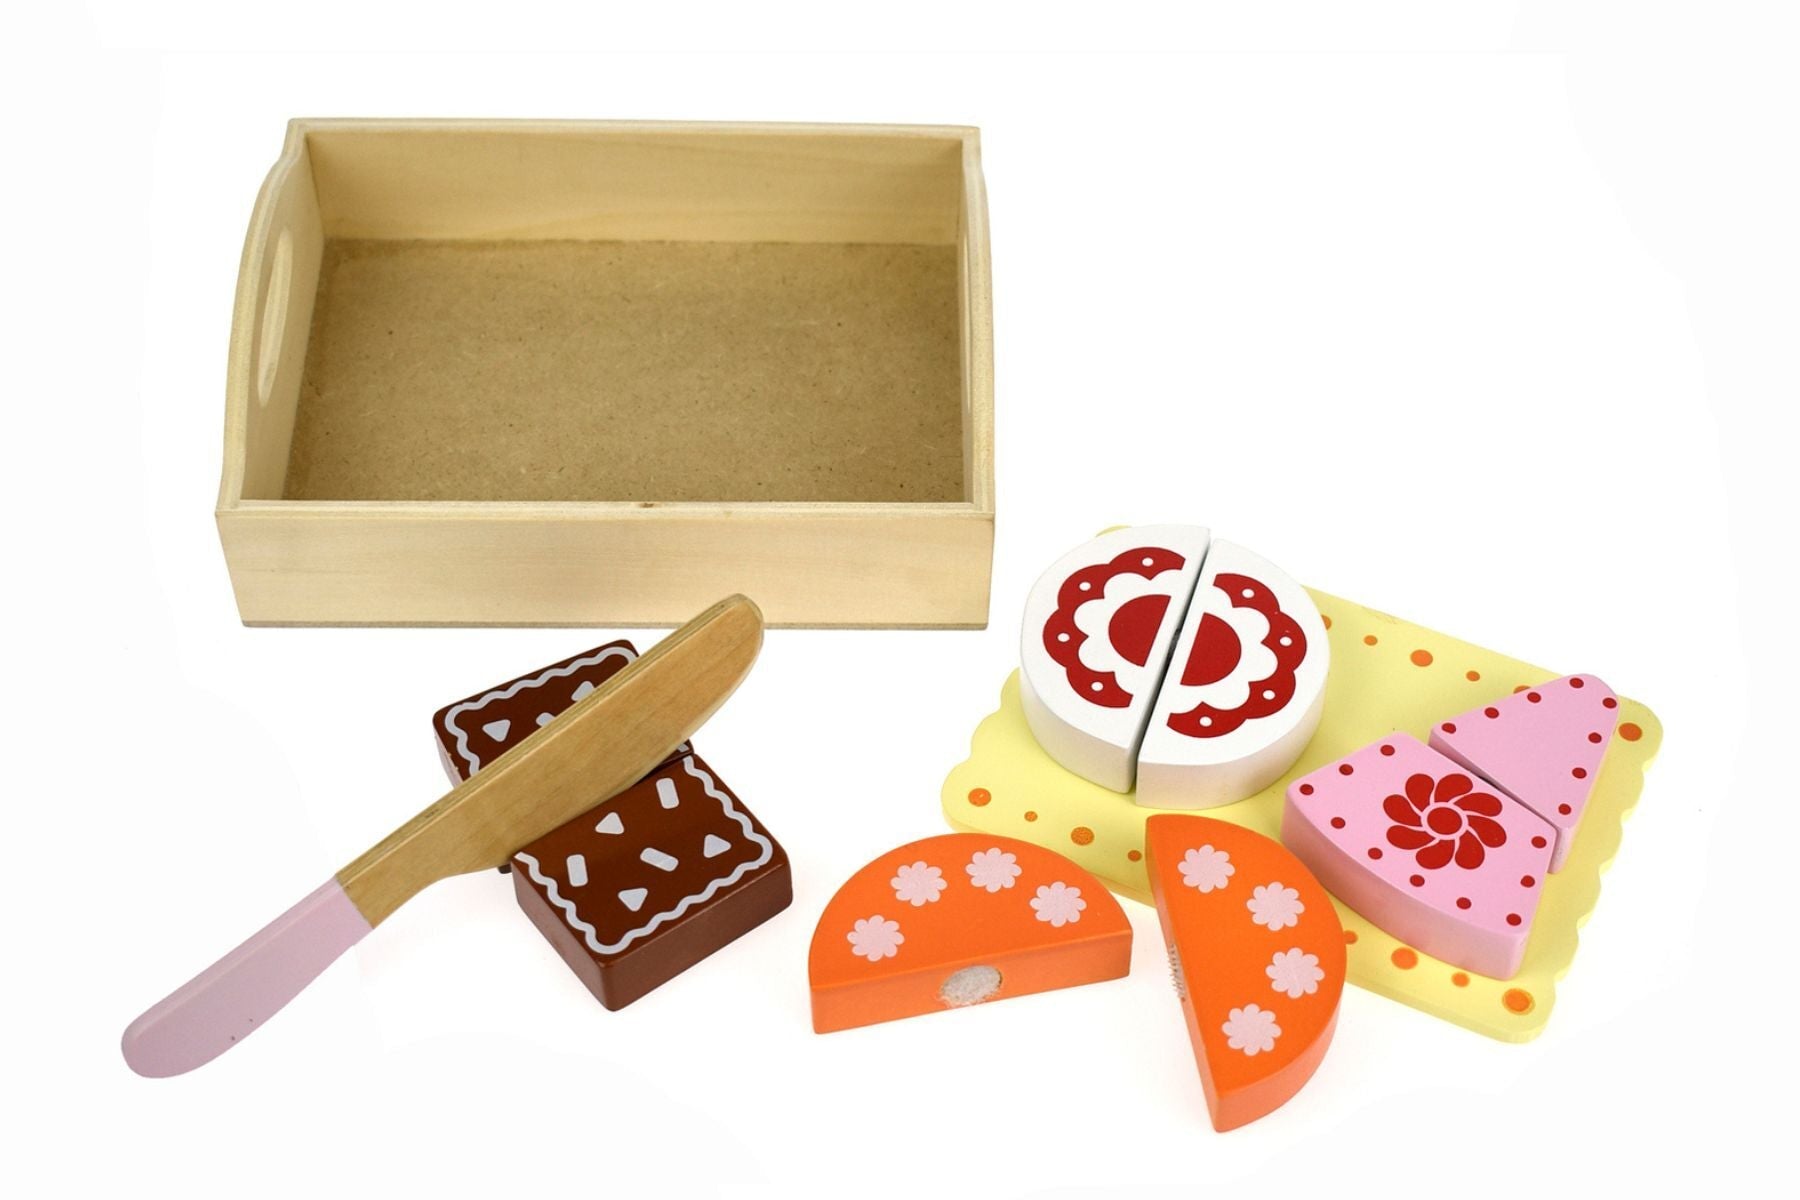 A wooden dessert tray with a toy cake, and serving utensils